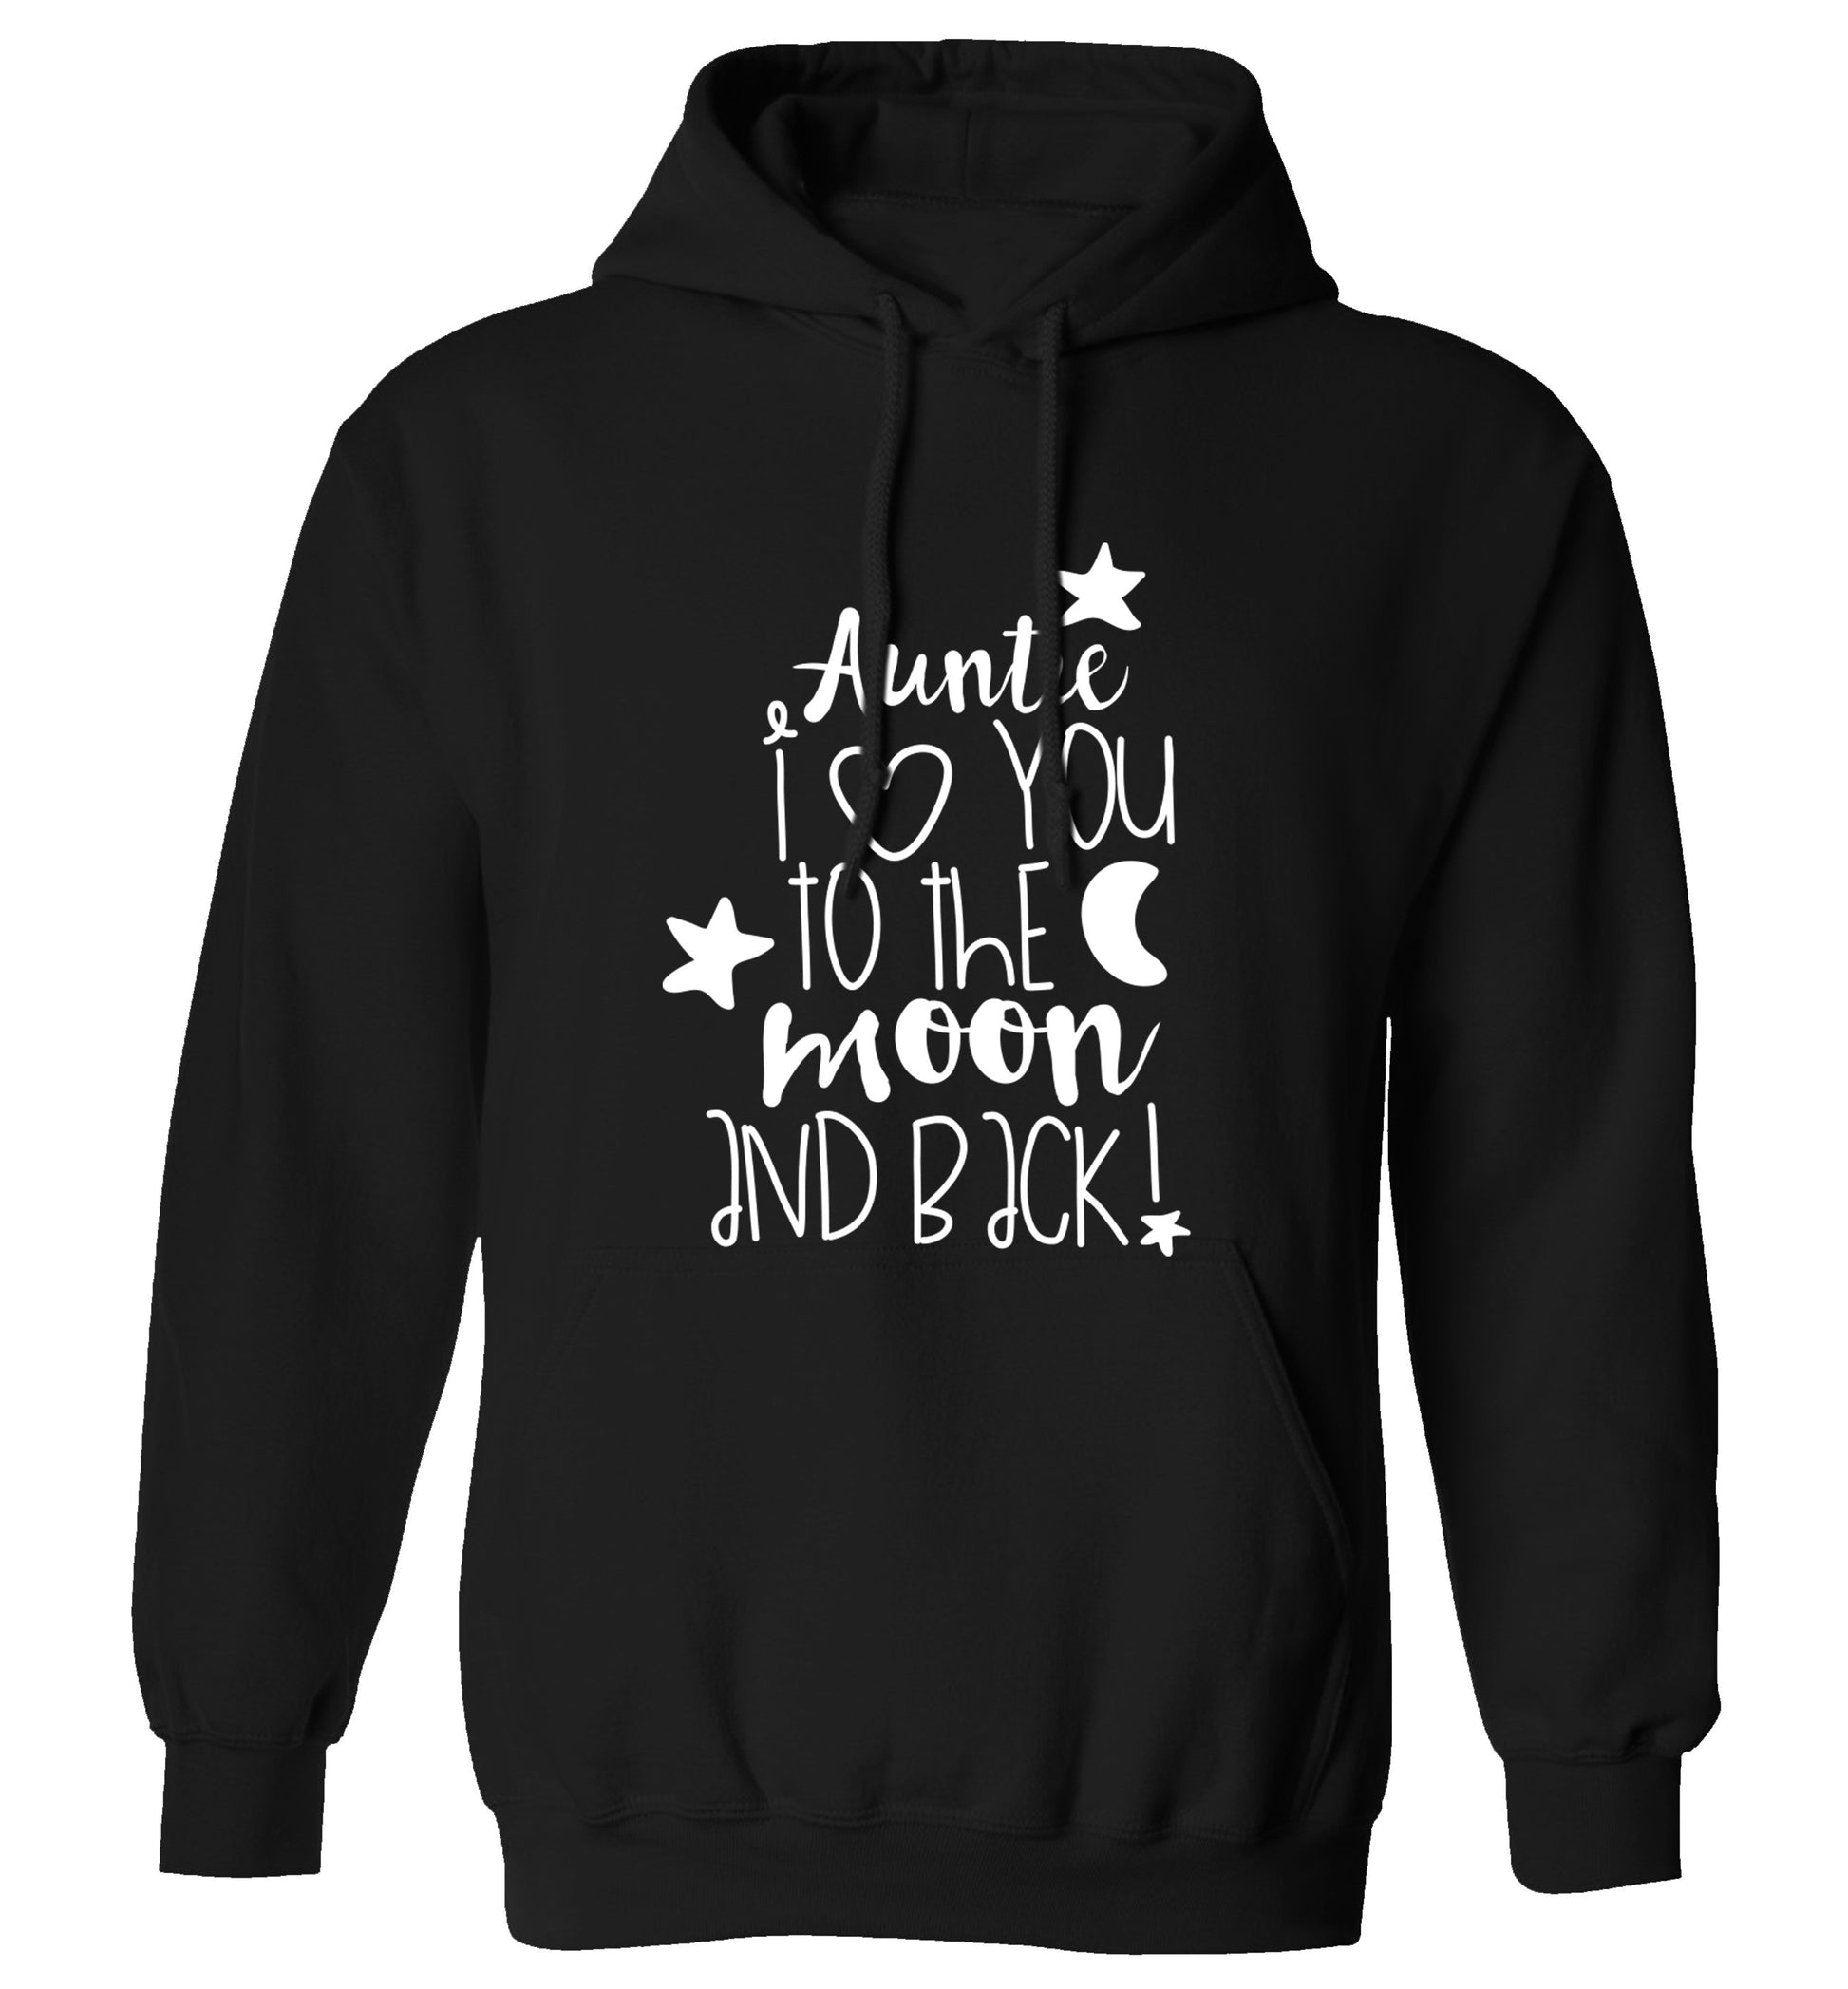 Auntie I love you to the moon and back adults unisex black hoodie 2XL